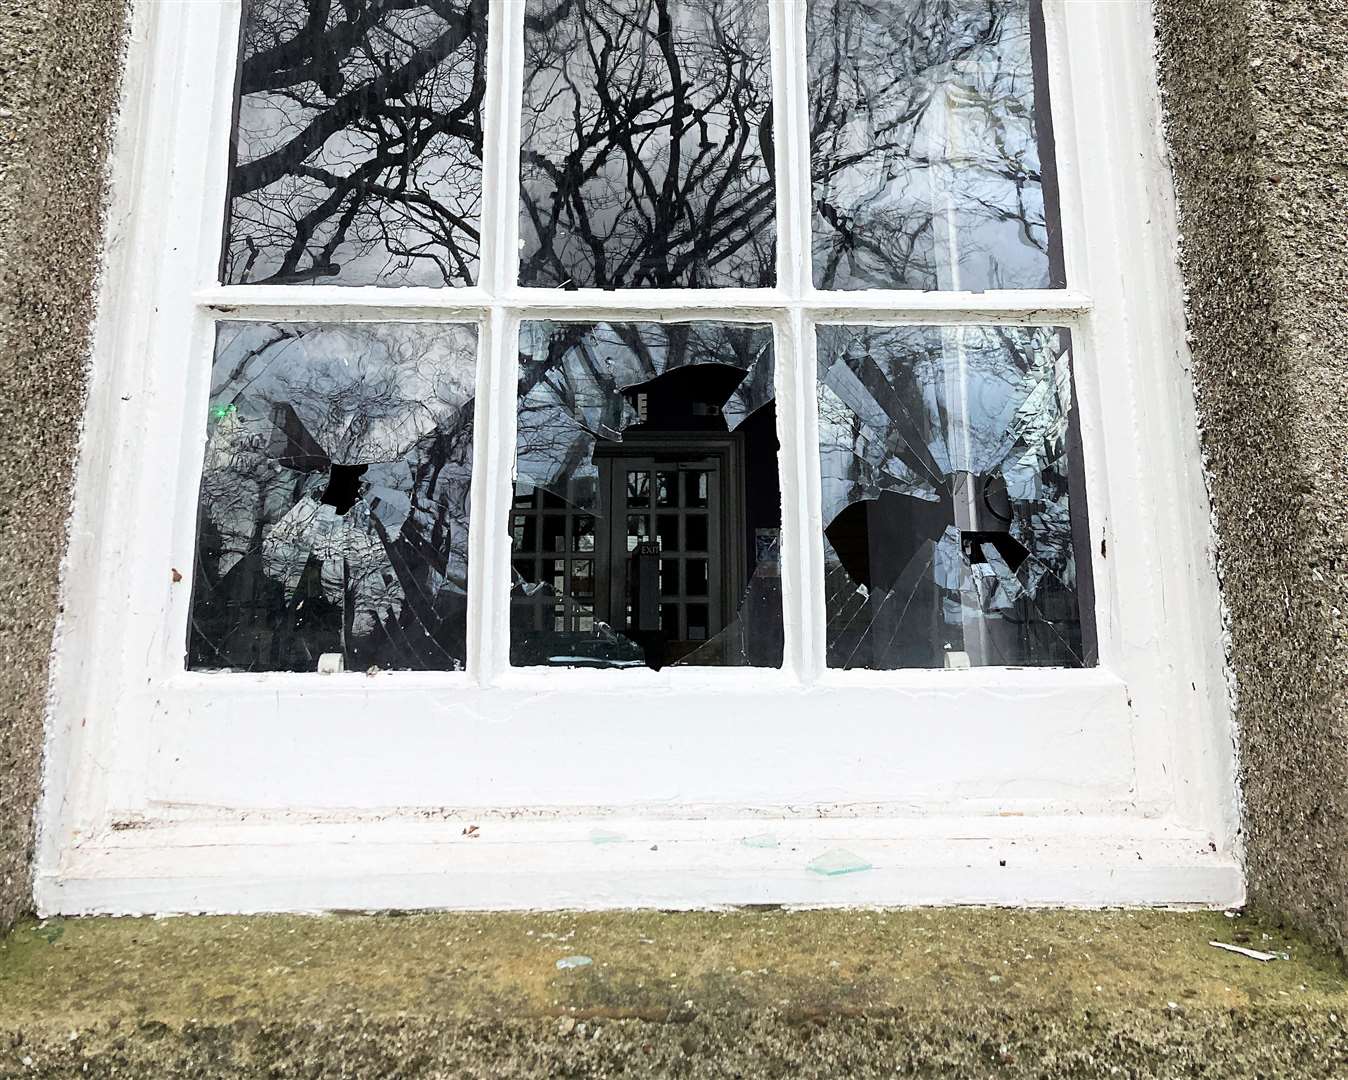 The vandalism occurred over several nights this week and last. Some stones went through the windows and landed up near the opposite walls within the building.